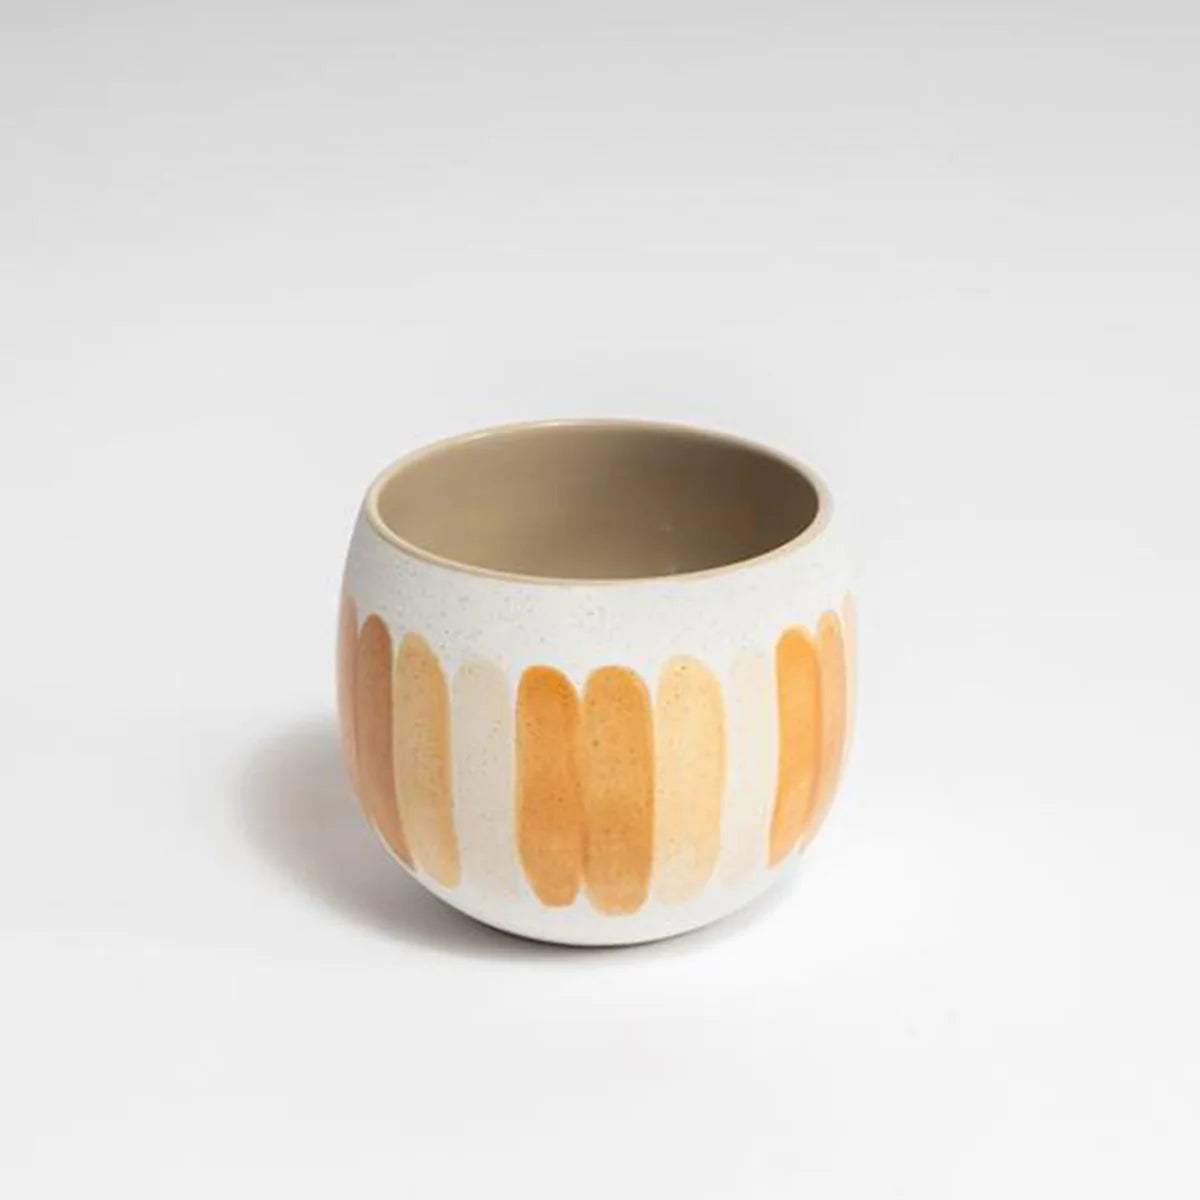 Orange and white ceramic cover pot for house plants